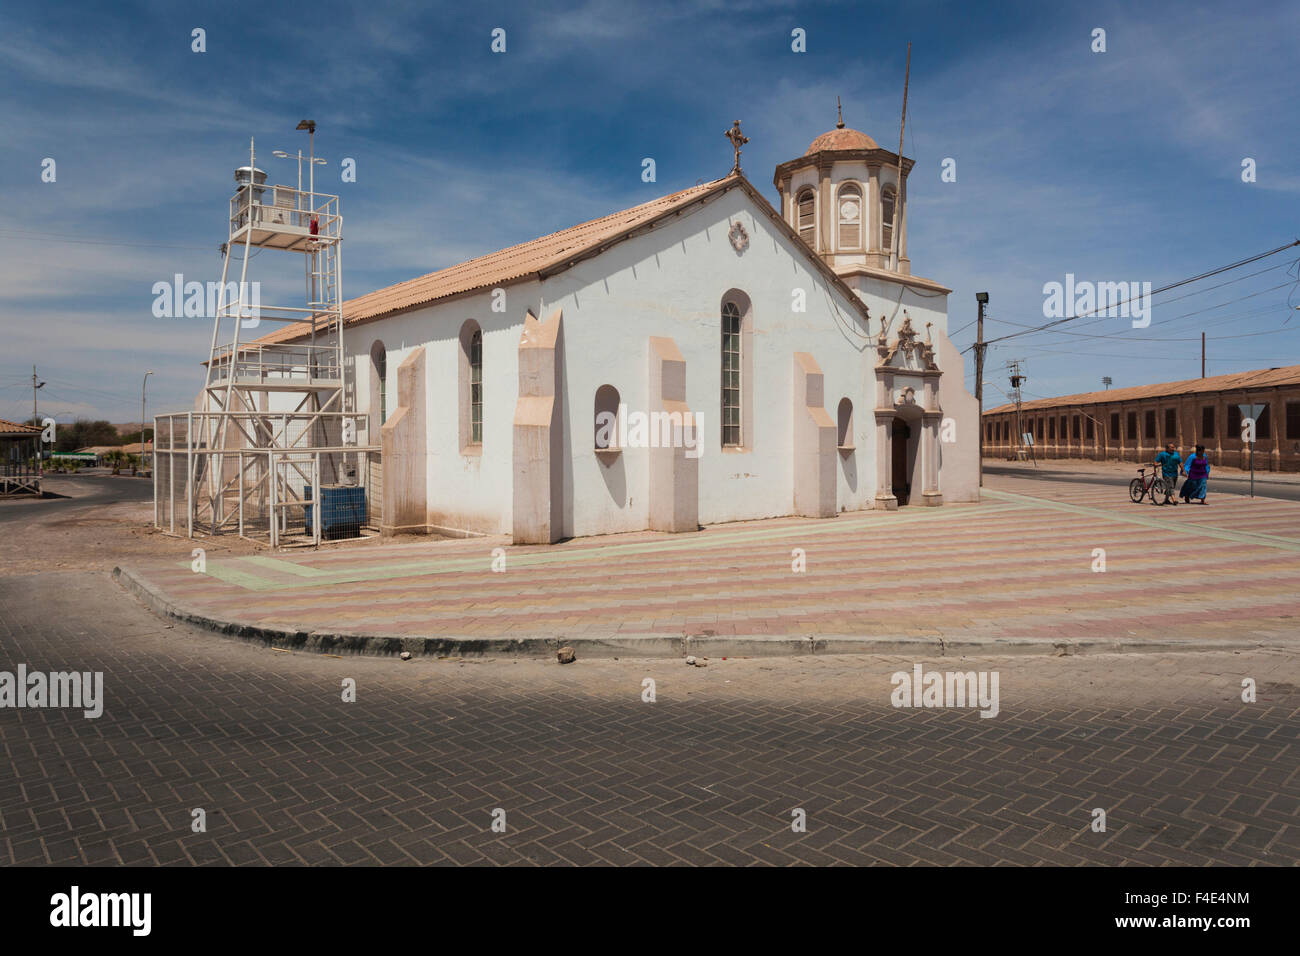 Chile, Maria Elena, last working saltpeter mining town in Chile, town church. Stock Photo